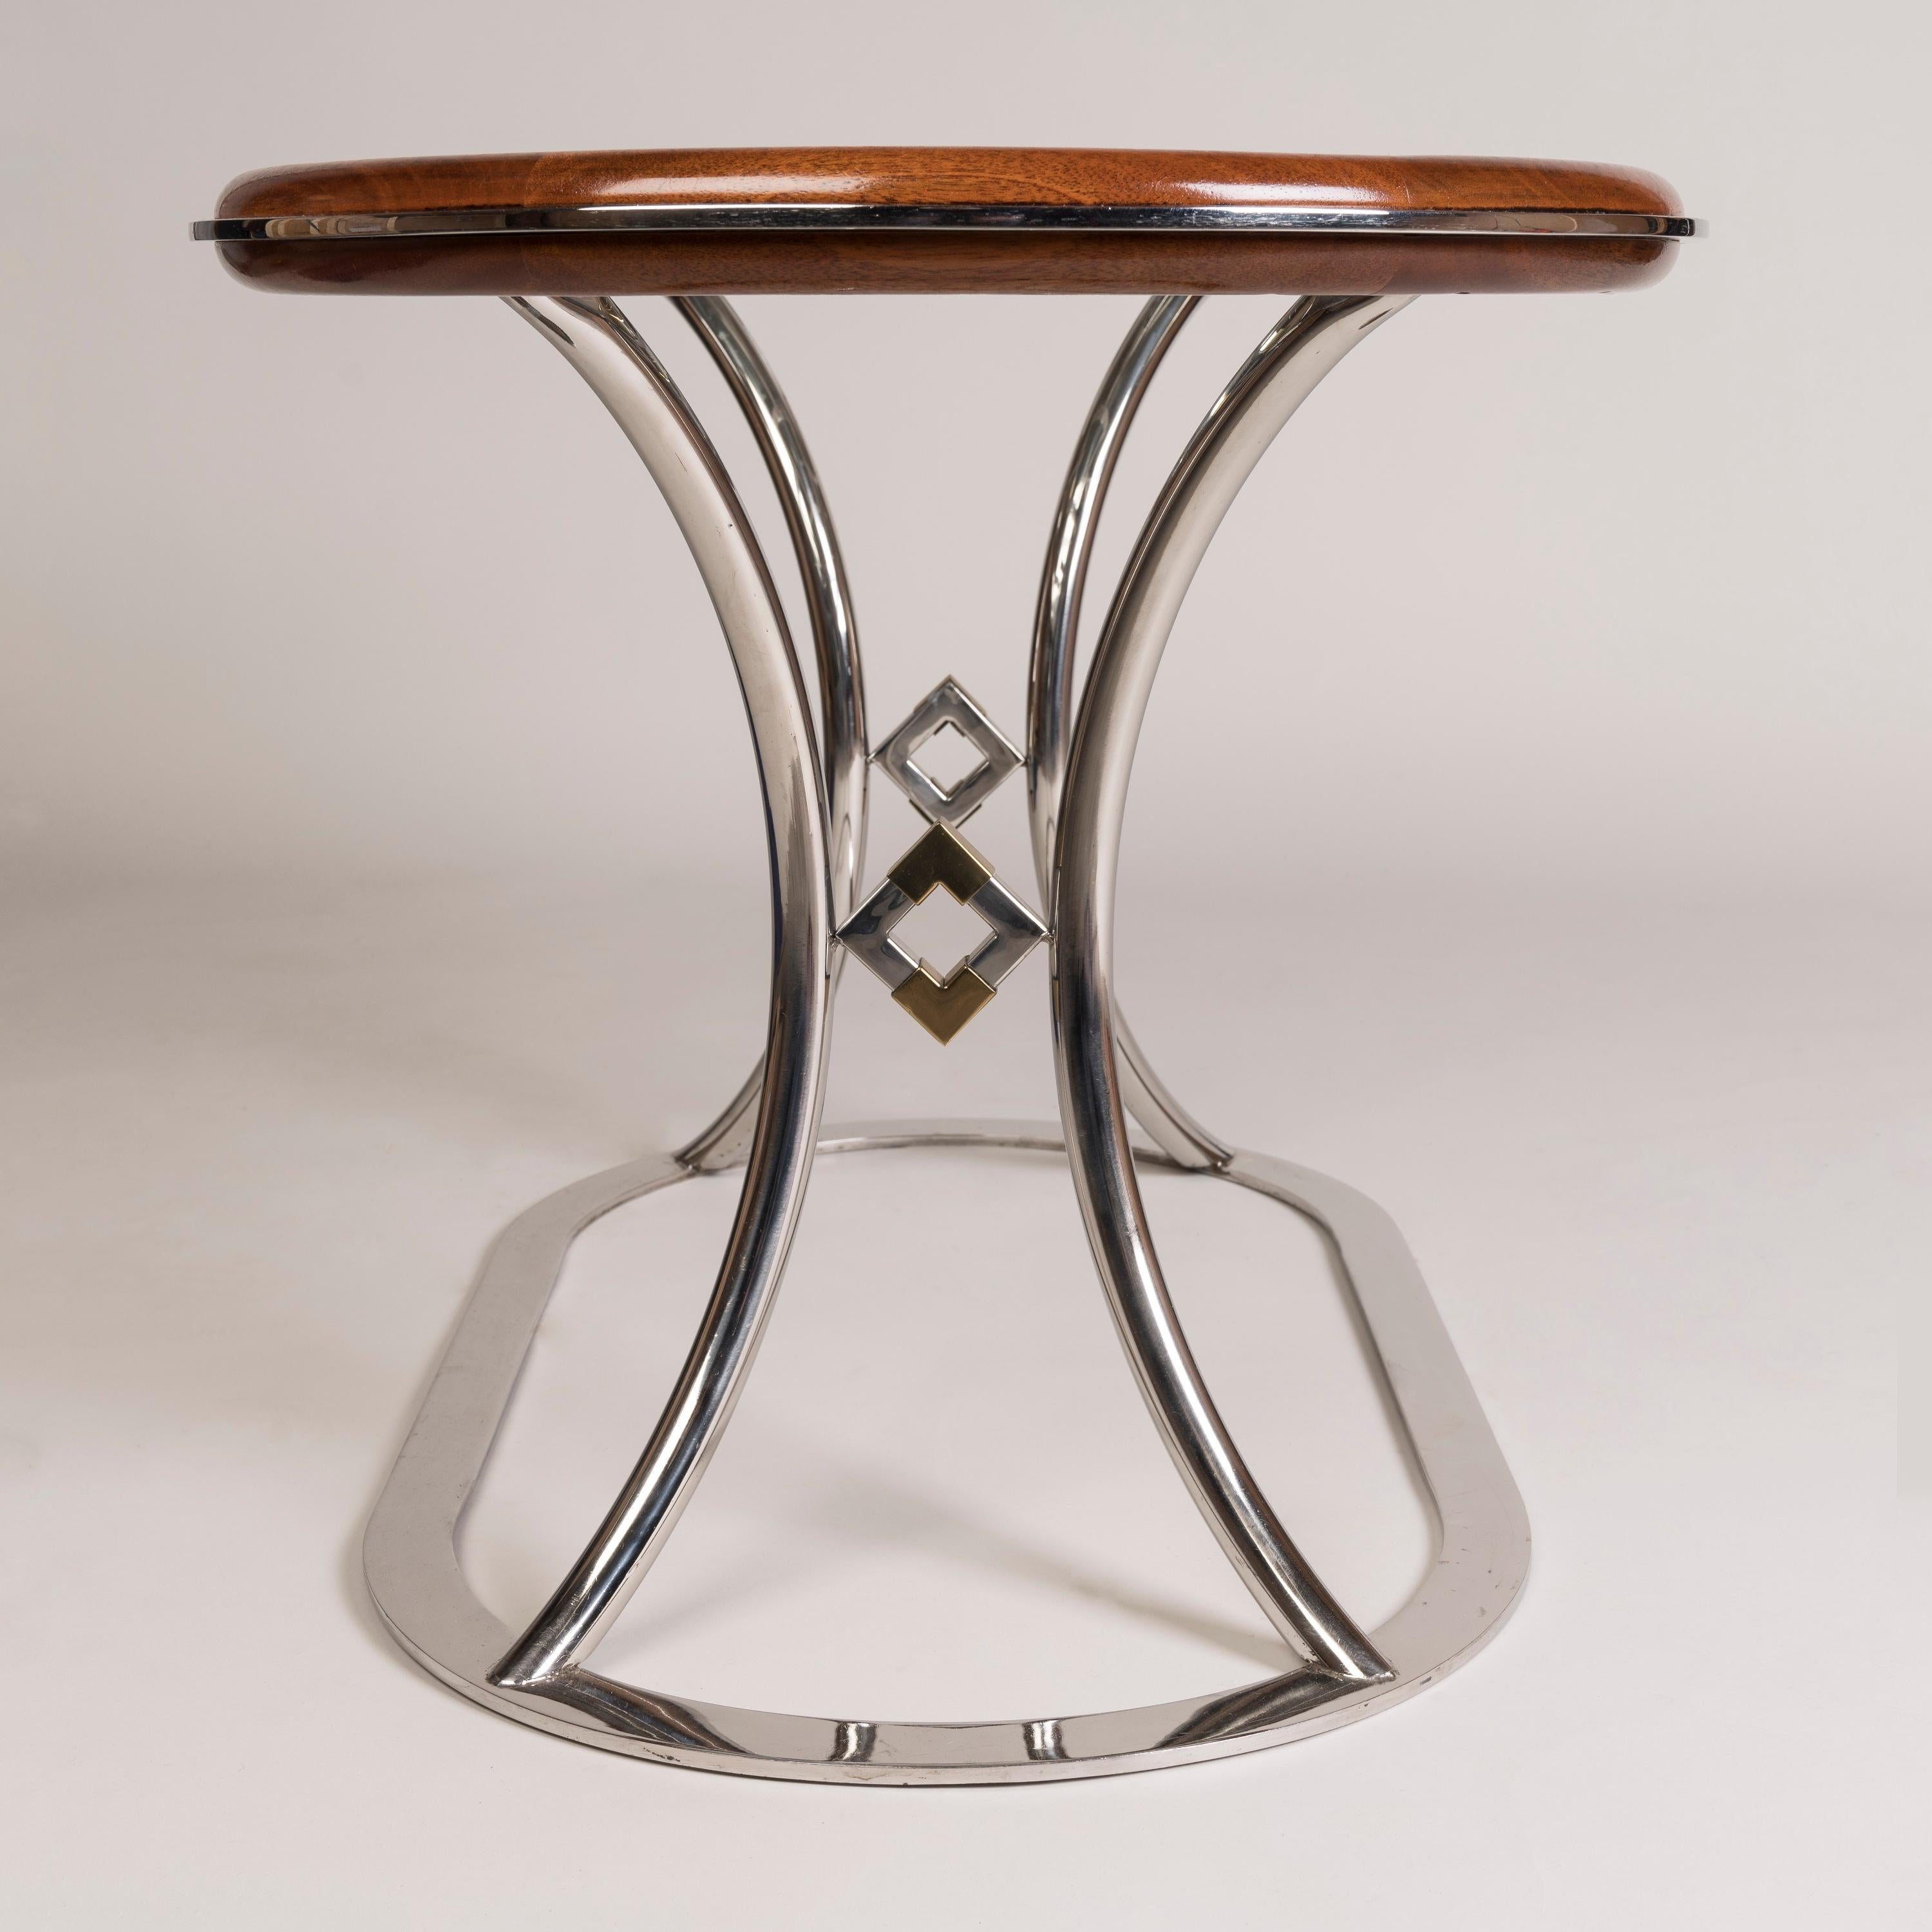 International Style Pair of French Post-War Modernist Oval Coffee Tables attributed to Maison Jansen For Sale